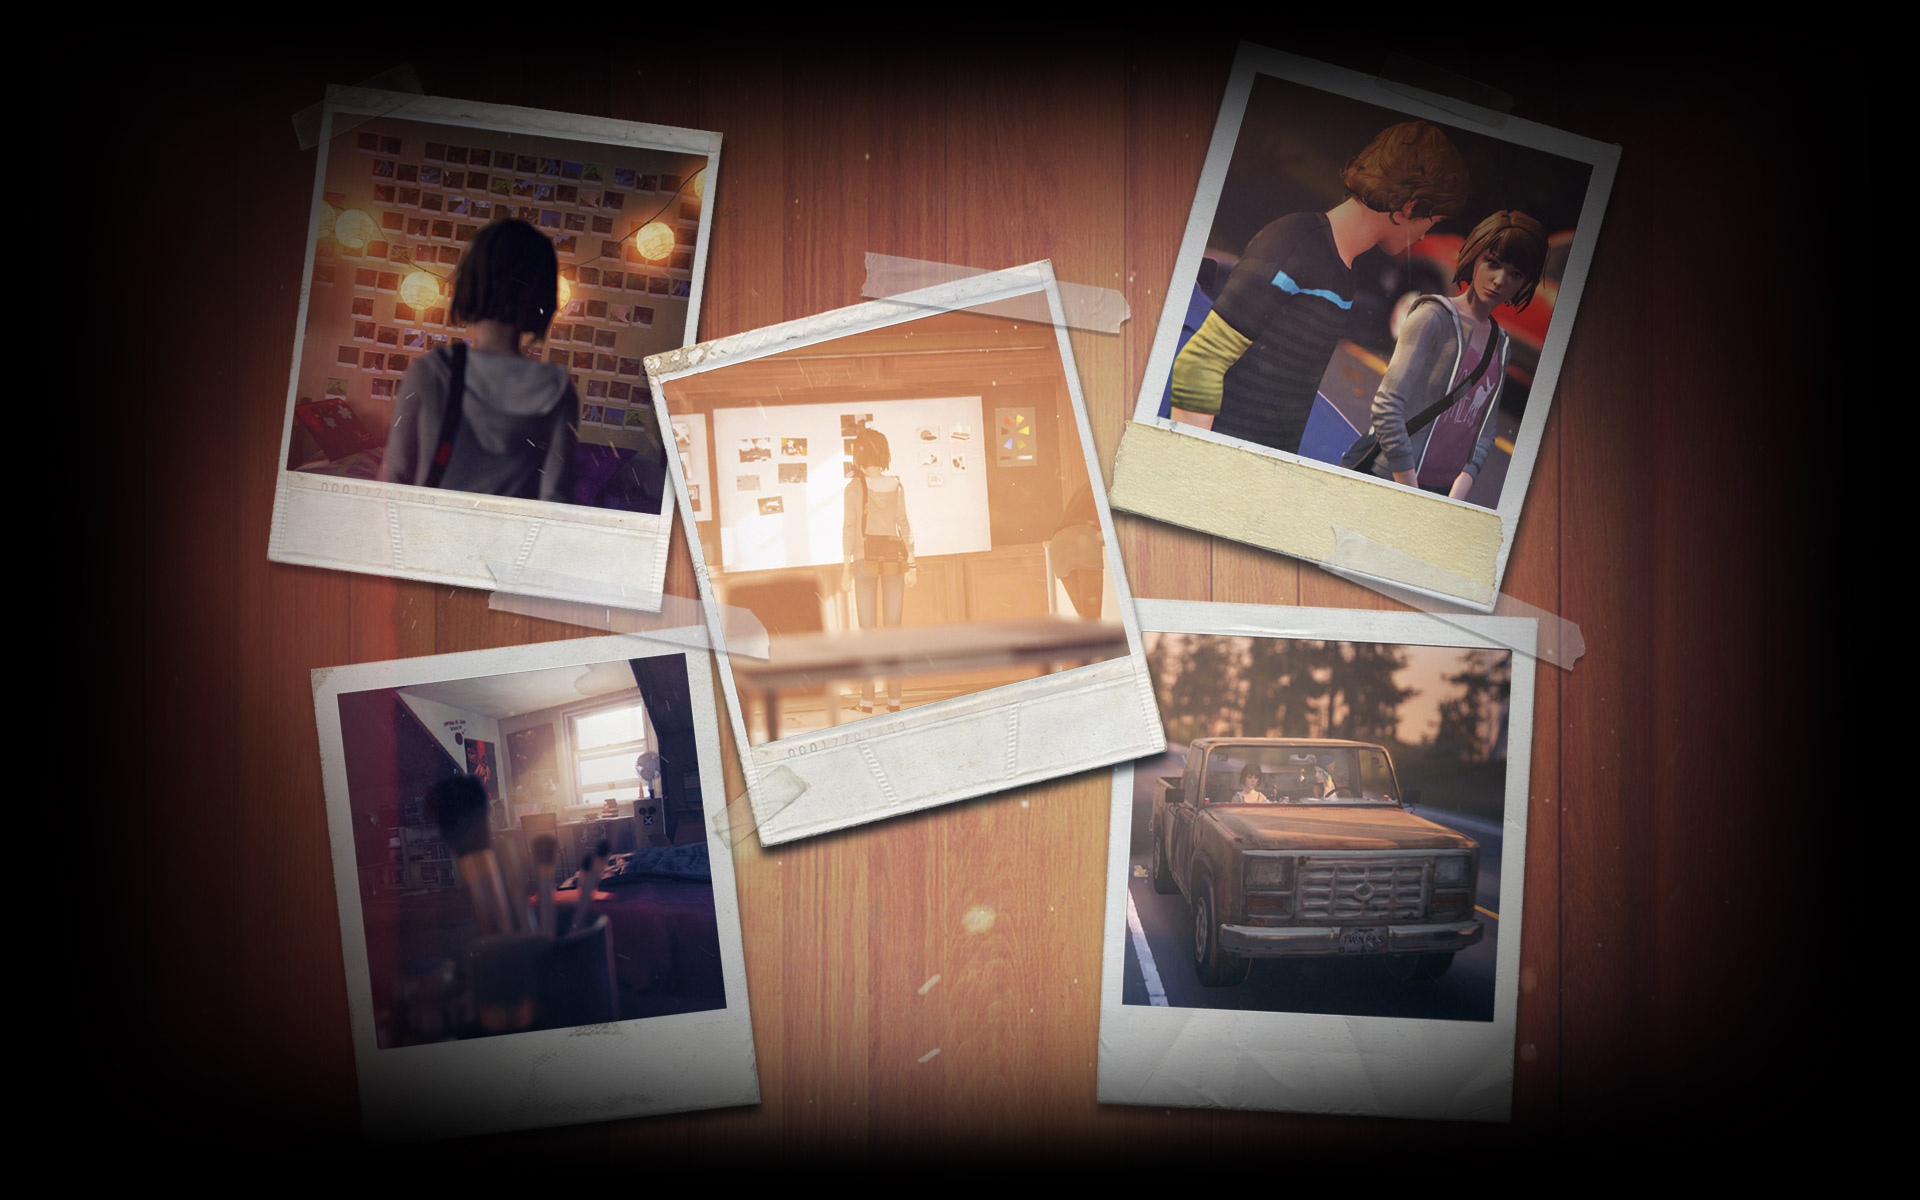 Steam Community Guide All Life Is Strange Backgrounds